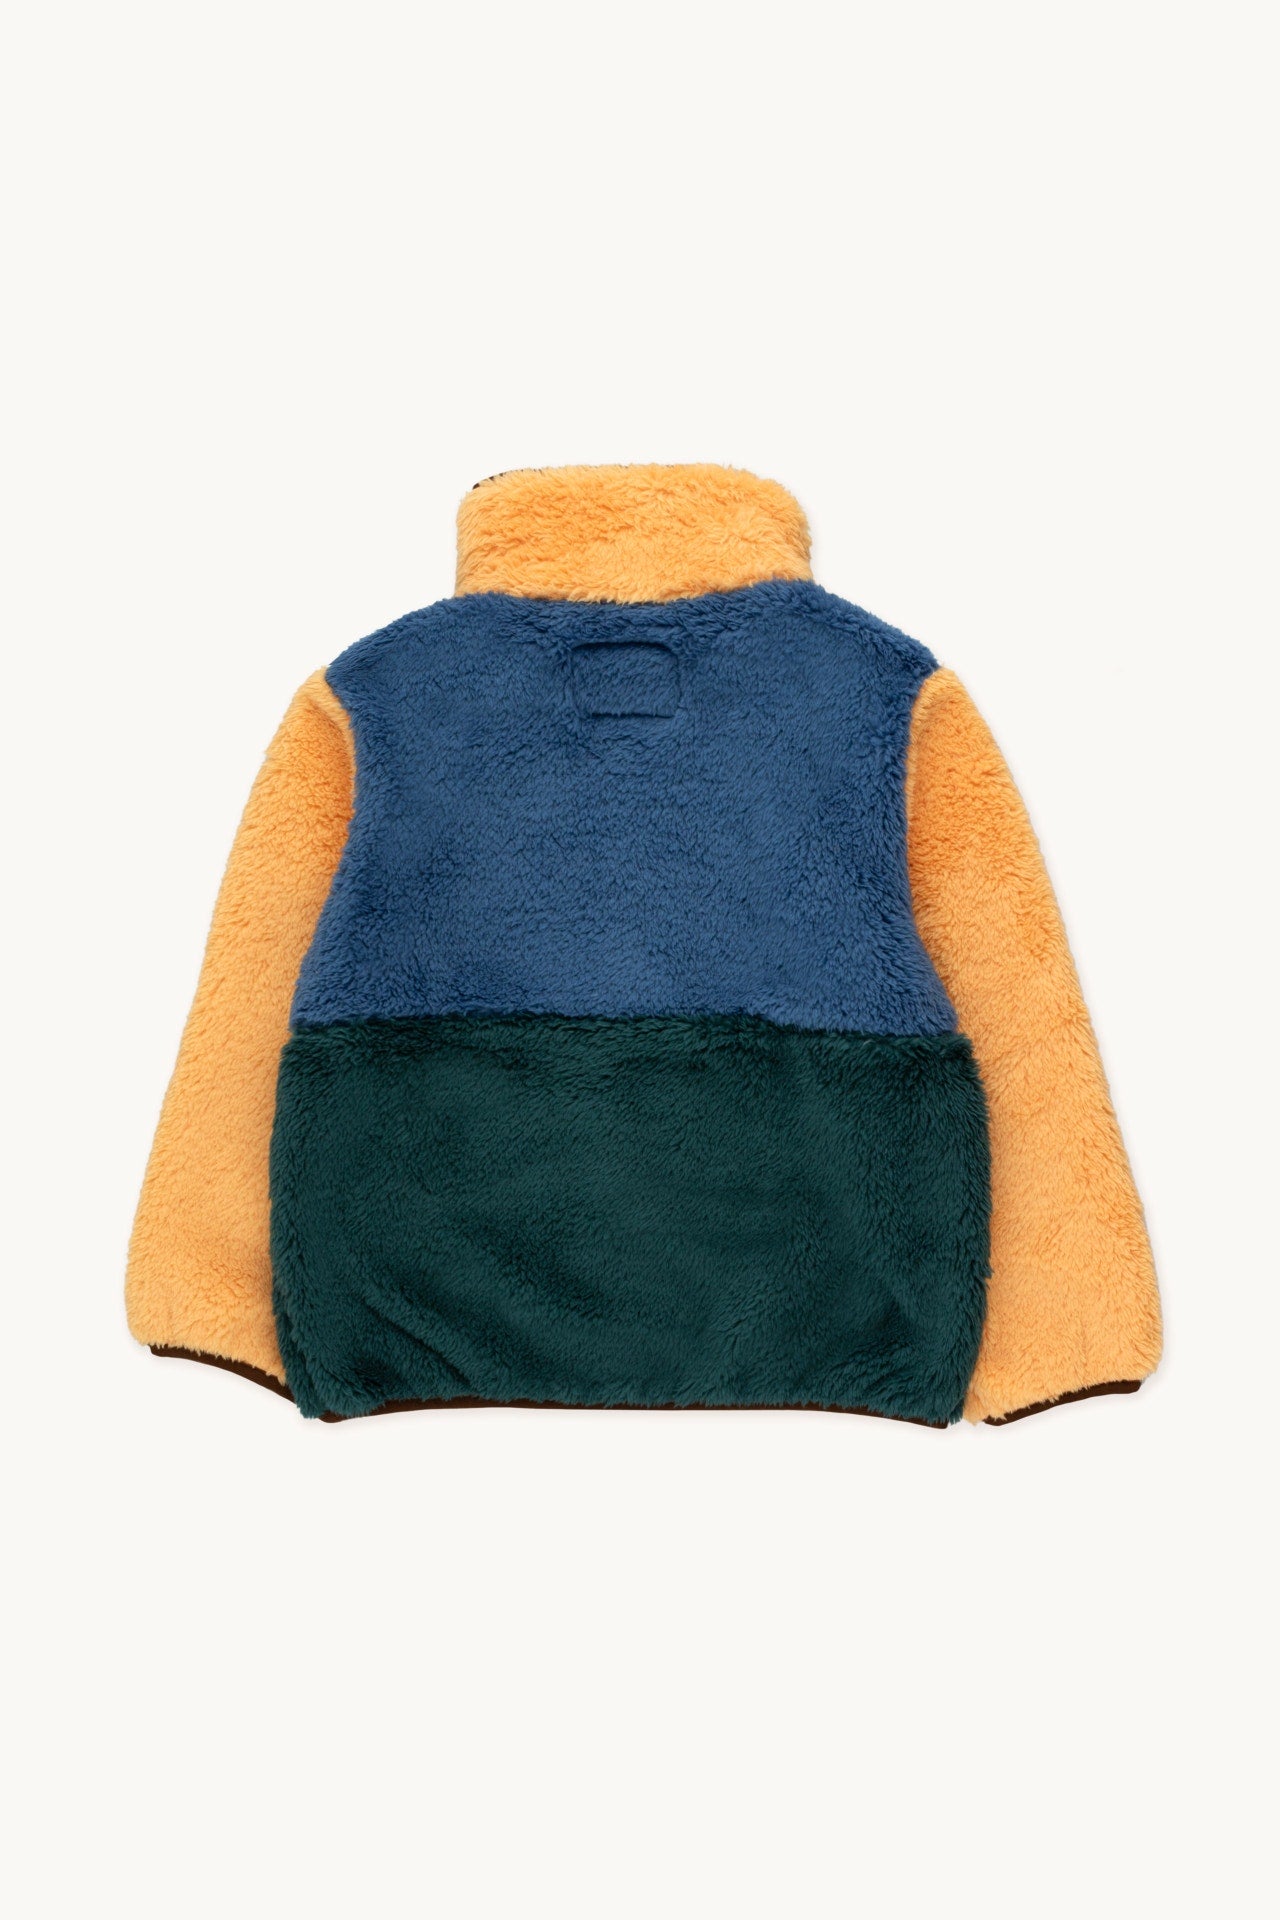 tiny cottons / Stay warm and stylish this winter with the Color Block Polar Sherpa Jumper. Features a unique color block design, snap closure, front pouch pocket and high collar.  Ethically made in China.